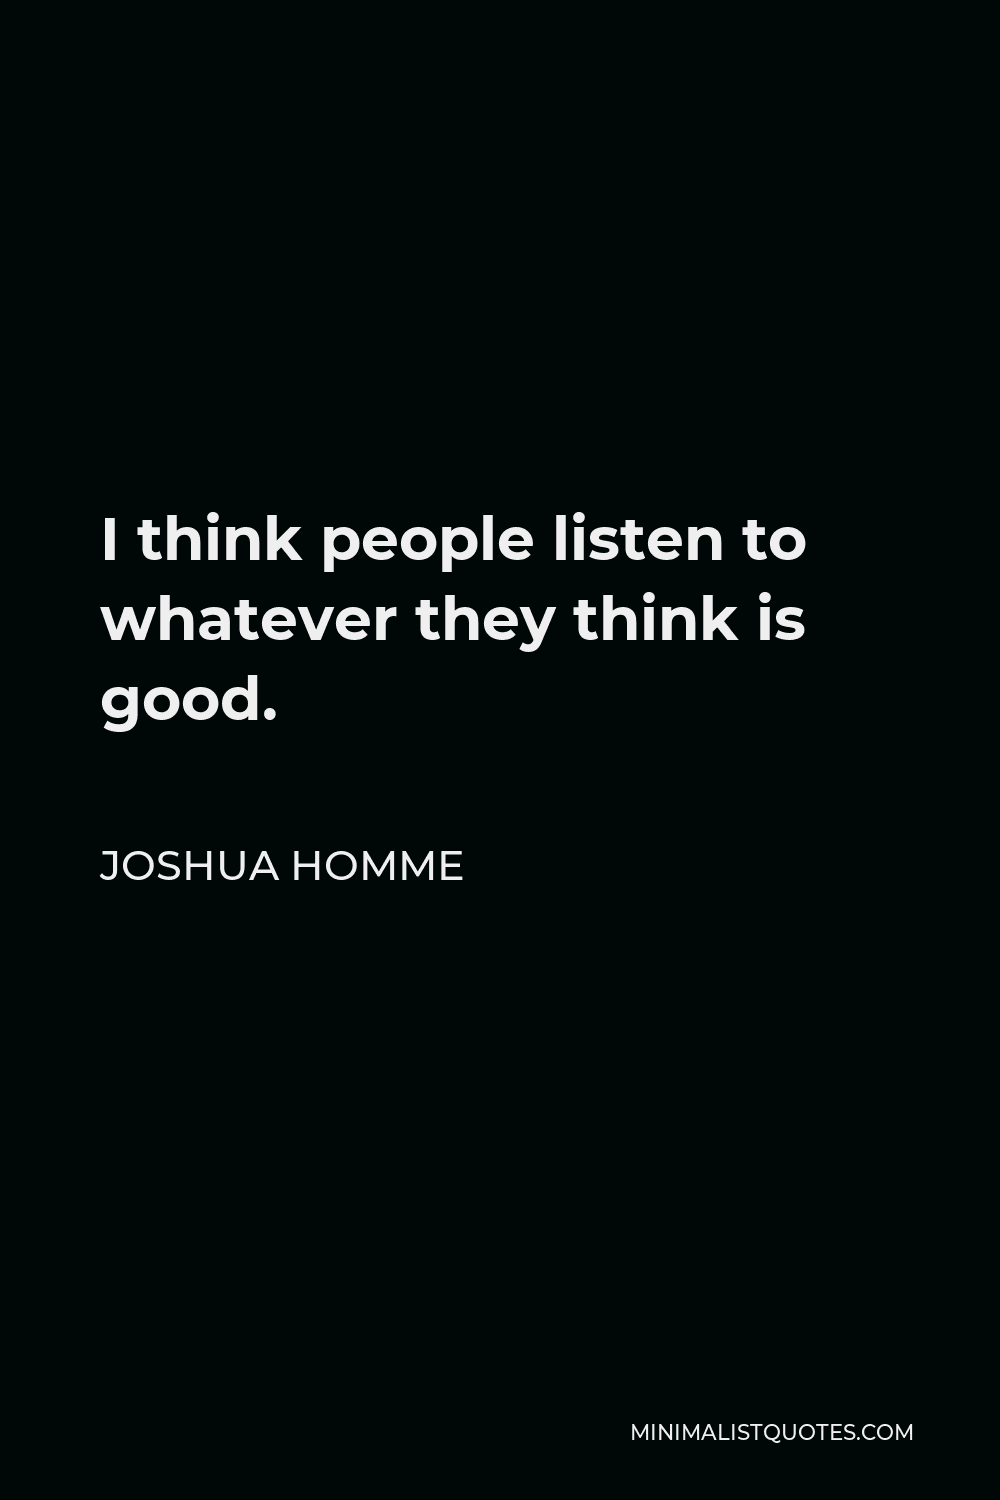 Joshua Homme Quote - I think people listen to whatever they think is good.